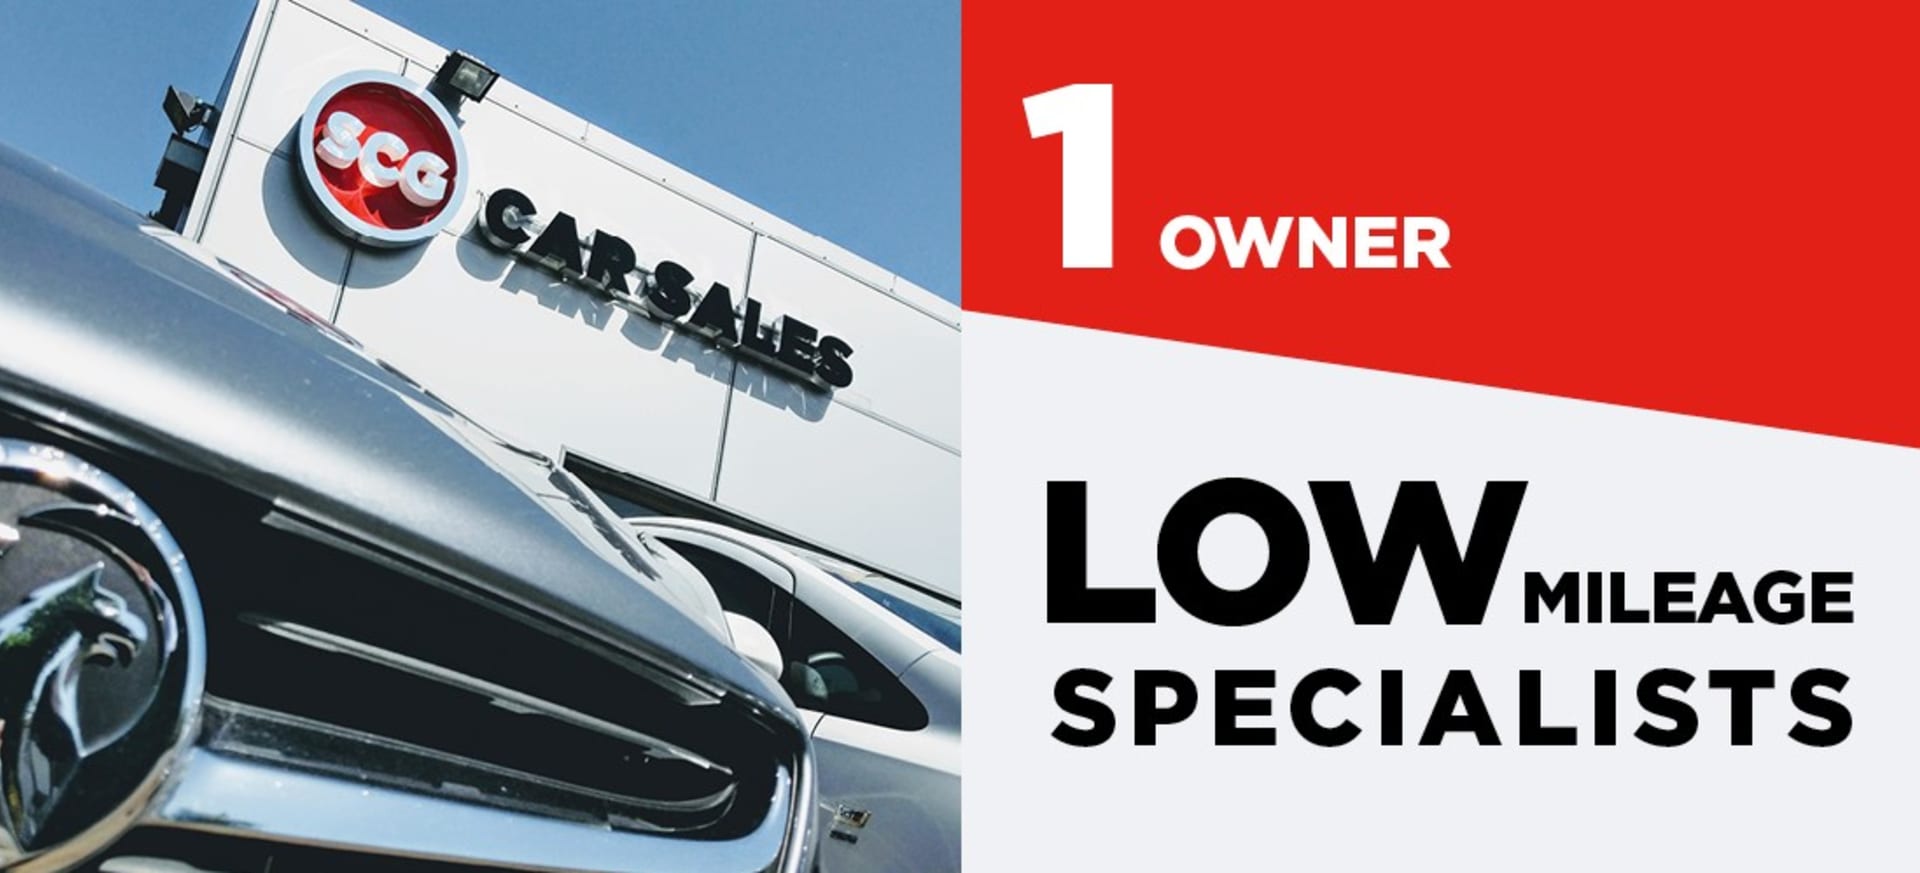 1 Owner Low Mileage Specialist